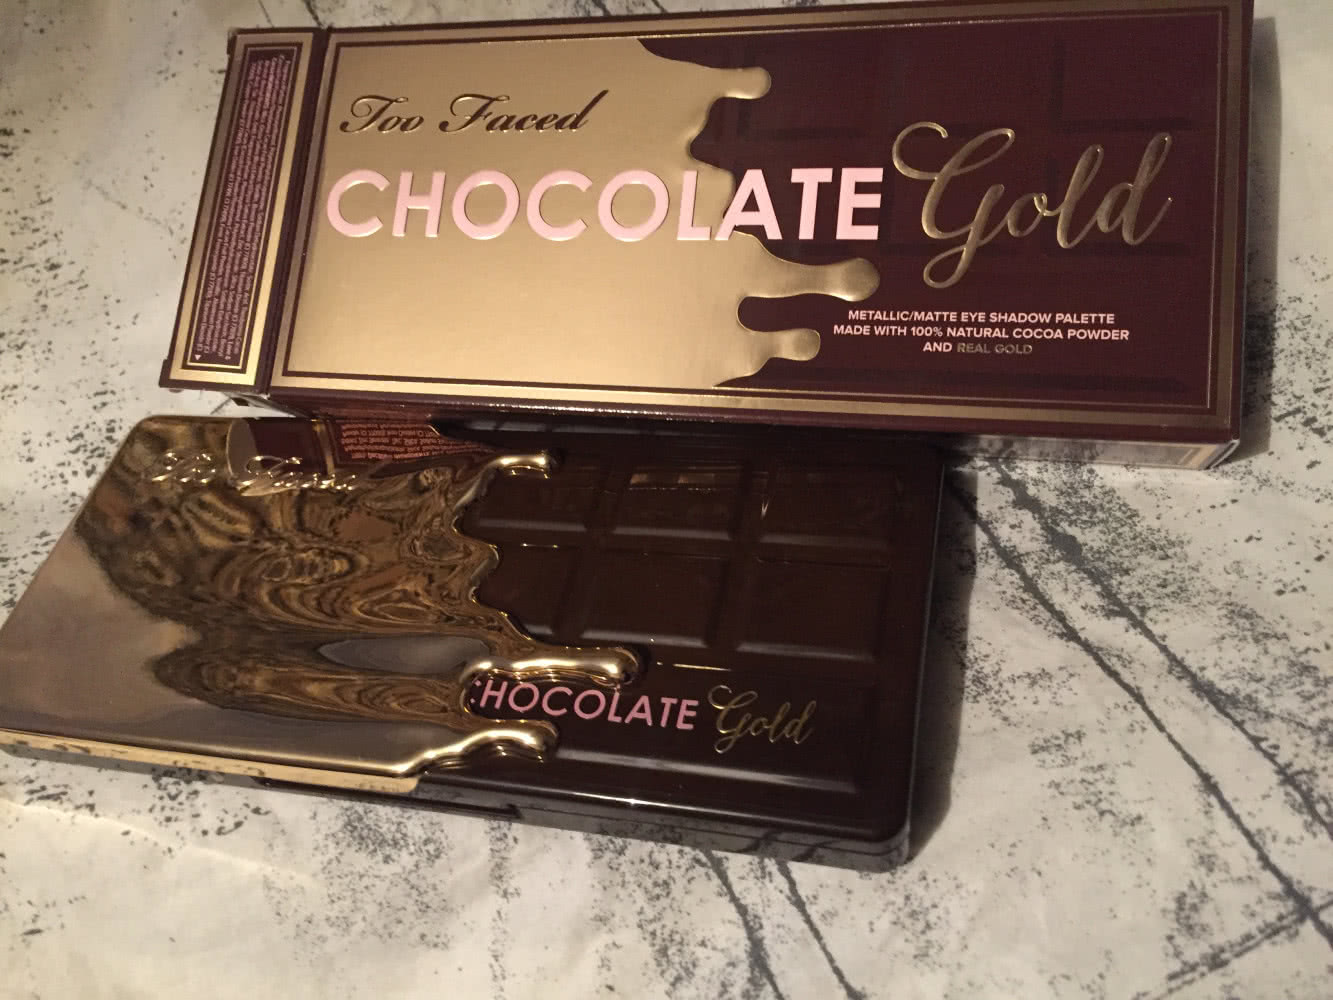 Too Faced, Chocolate Gold Palette